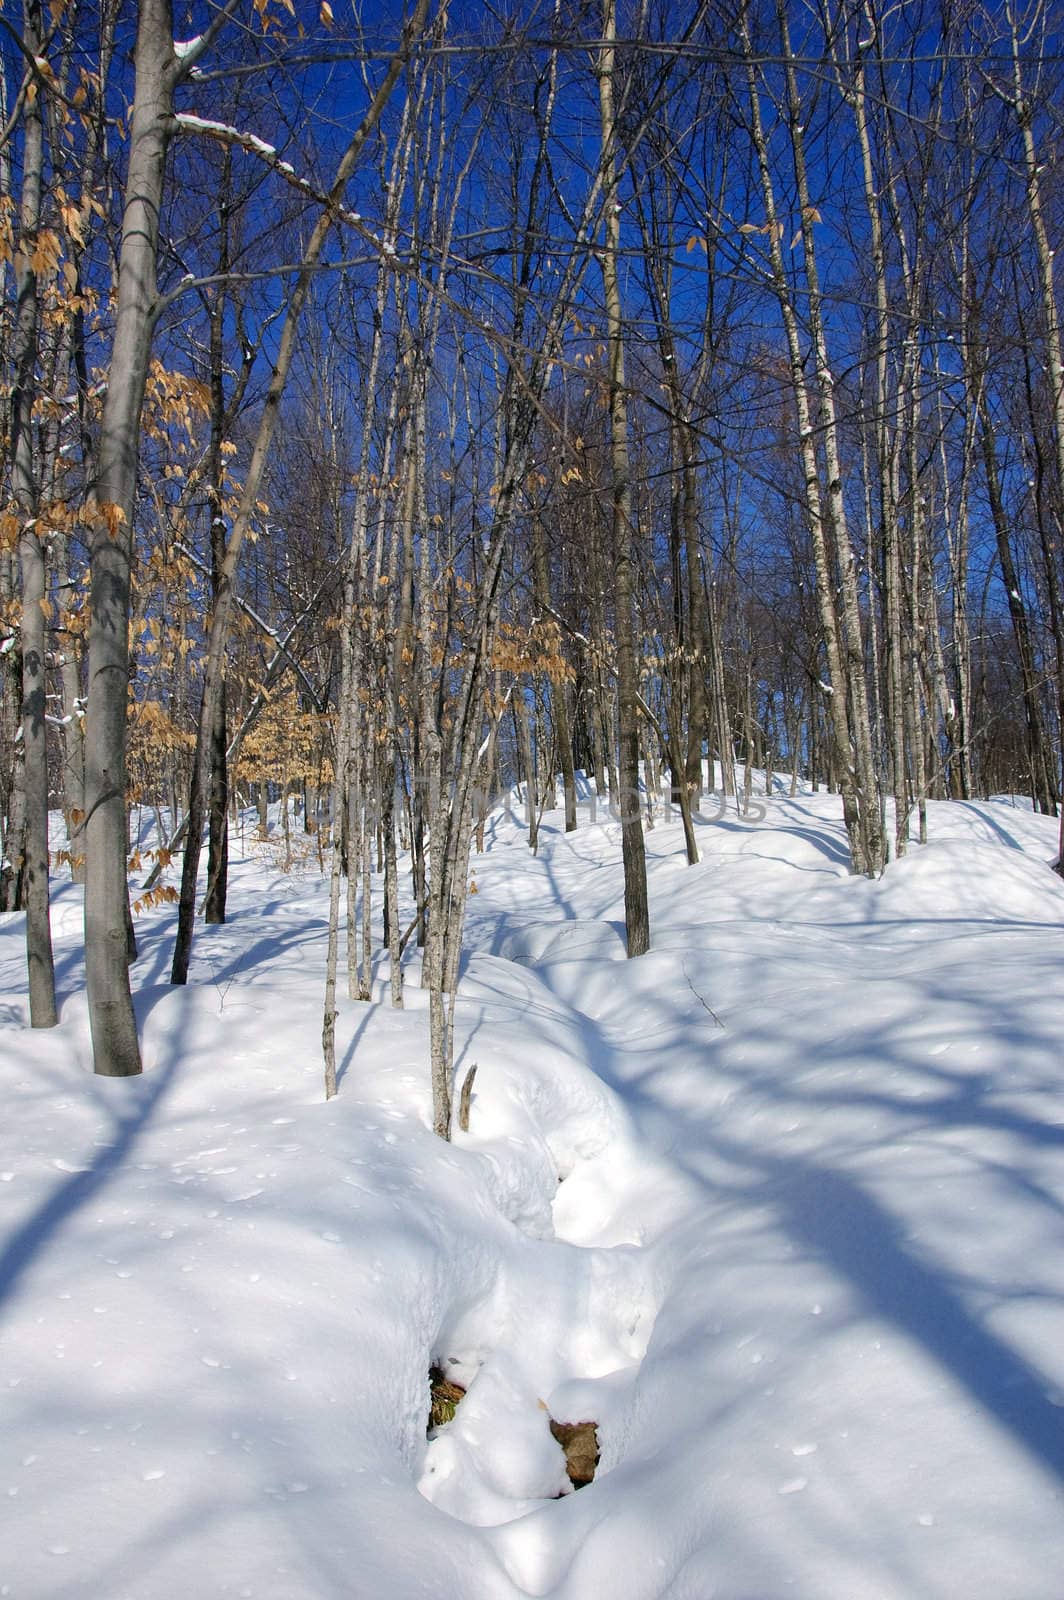 View of a northern forest in Winter